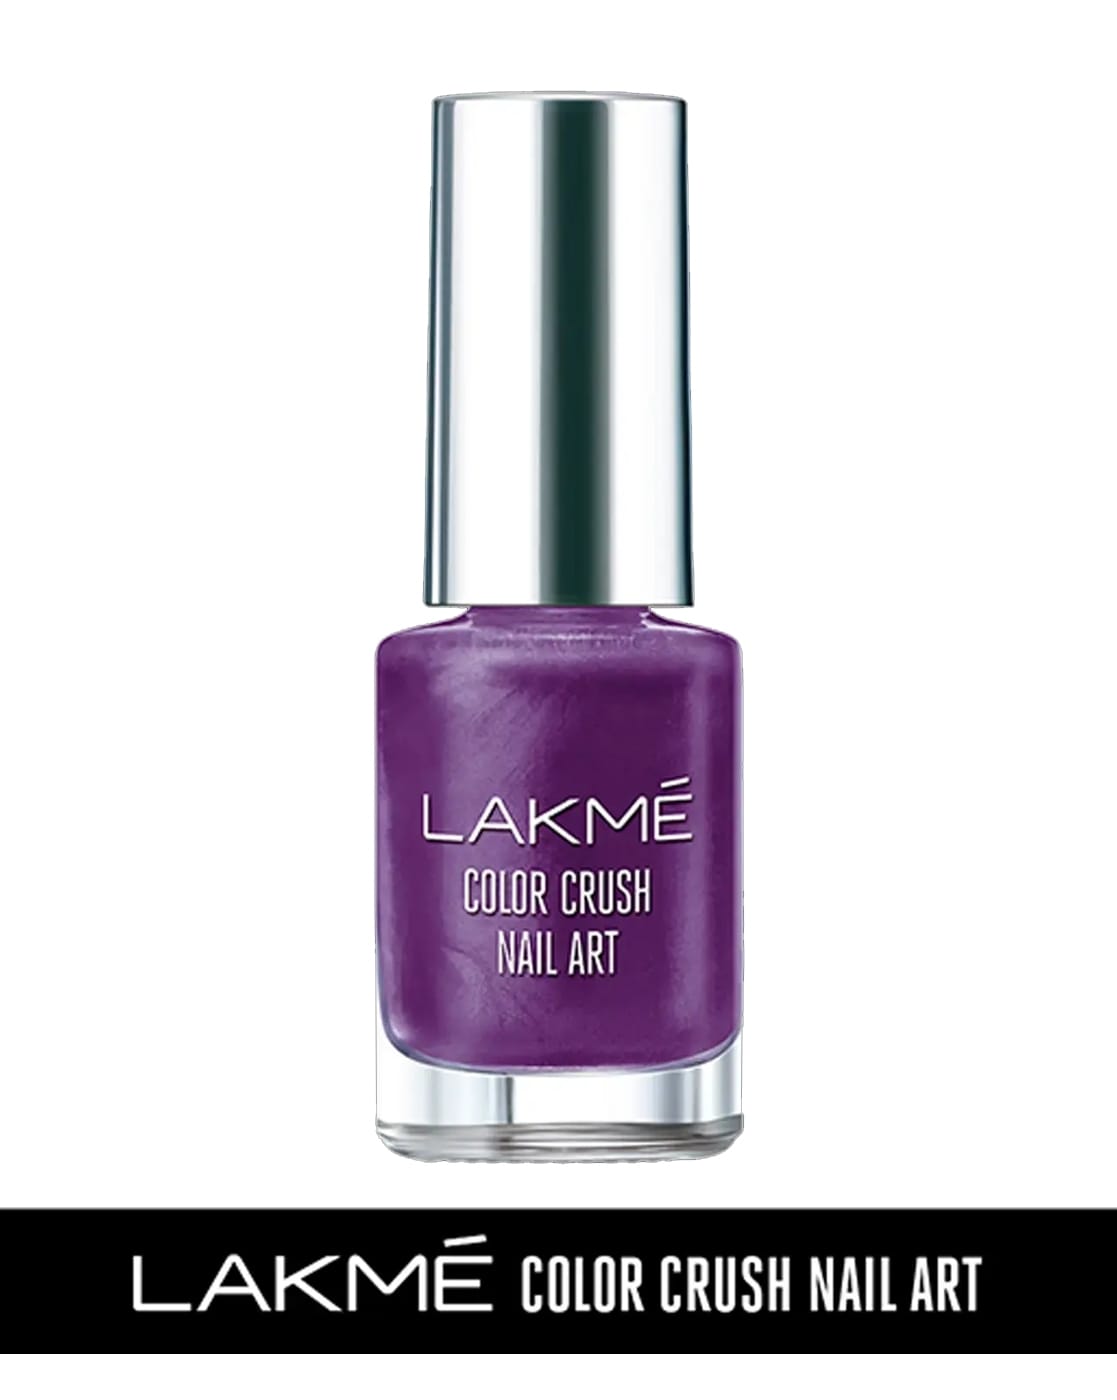 Lakme Absolute Gel Stylist Nail Color With Glossy Finish, Butterscotch,12  ml | eBay